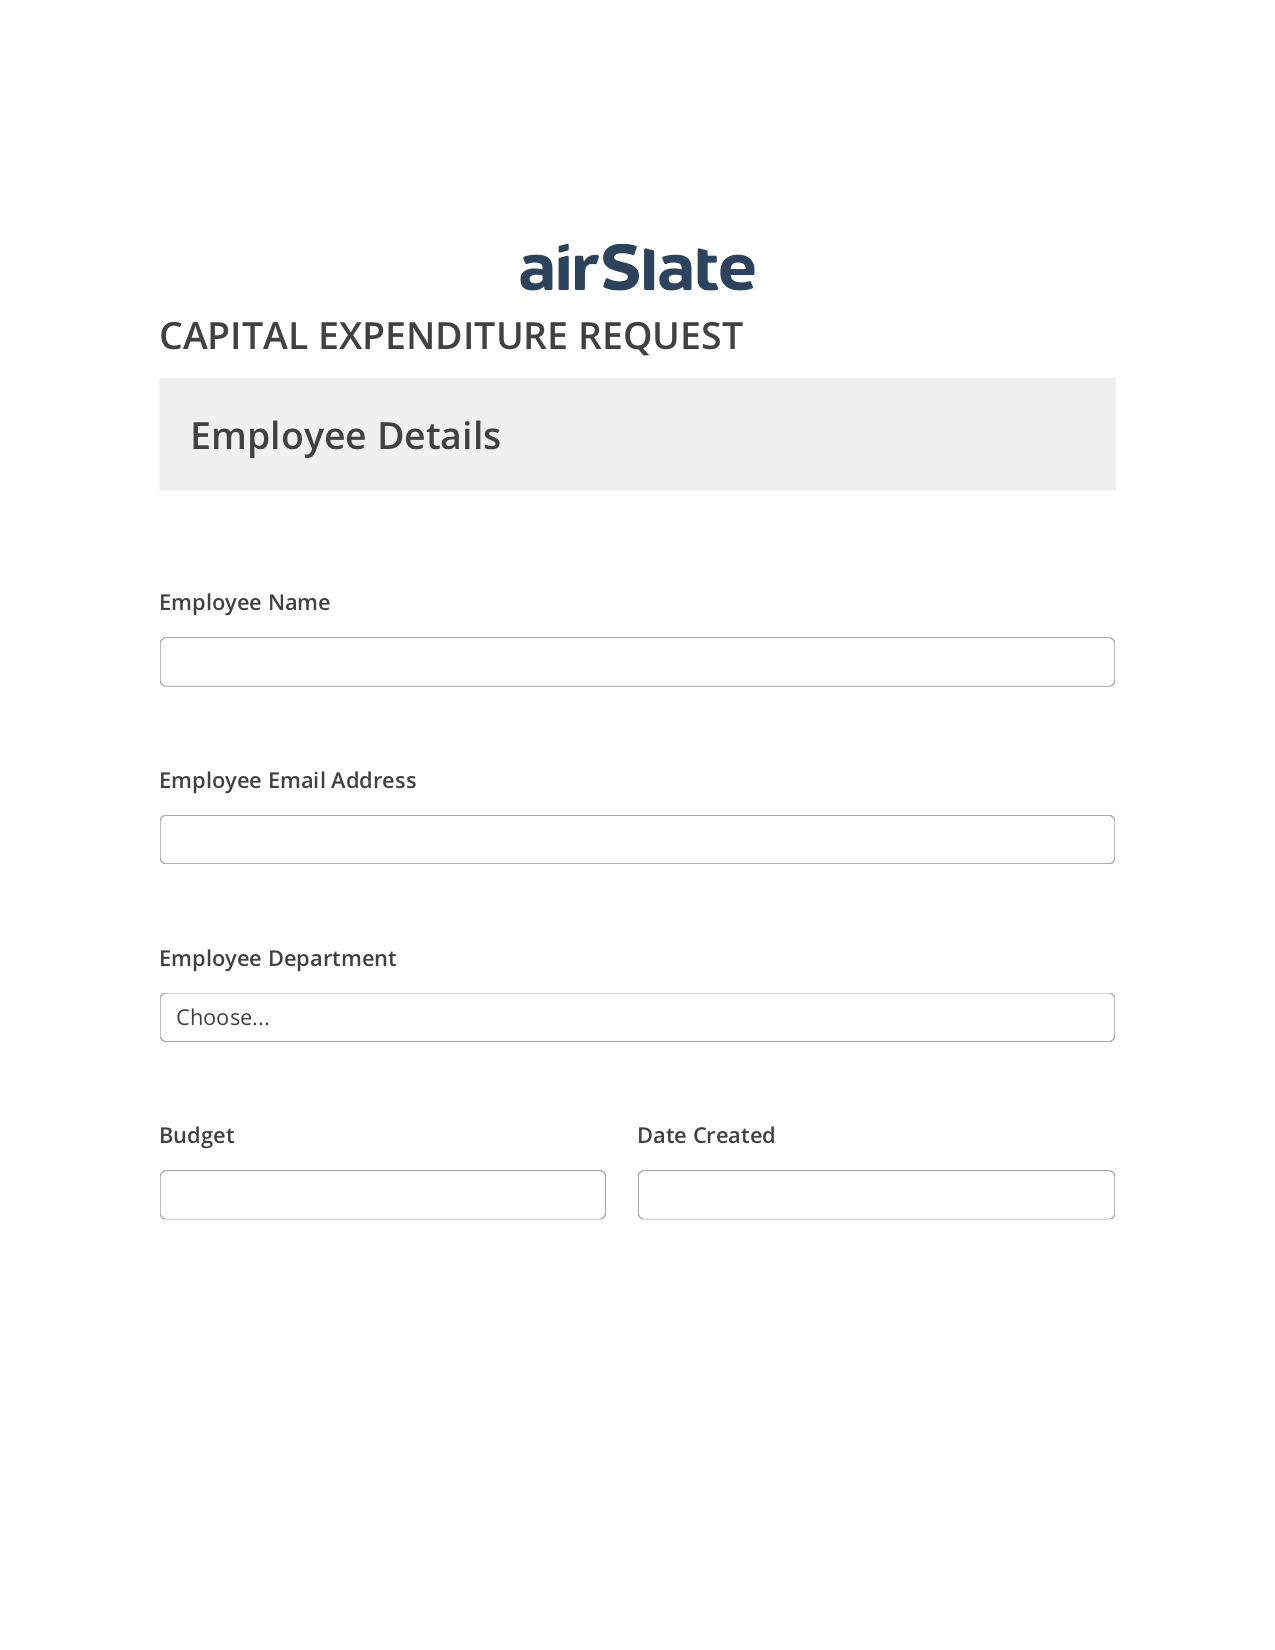 Capital Expenditure Request Approval Workflow Pre-fill from Google Sheet Dropdown Options Bot, Update Audit Trail Bot, Export to Google Sheet Bot